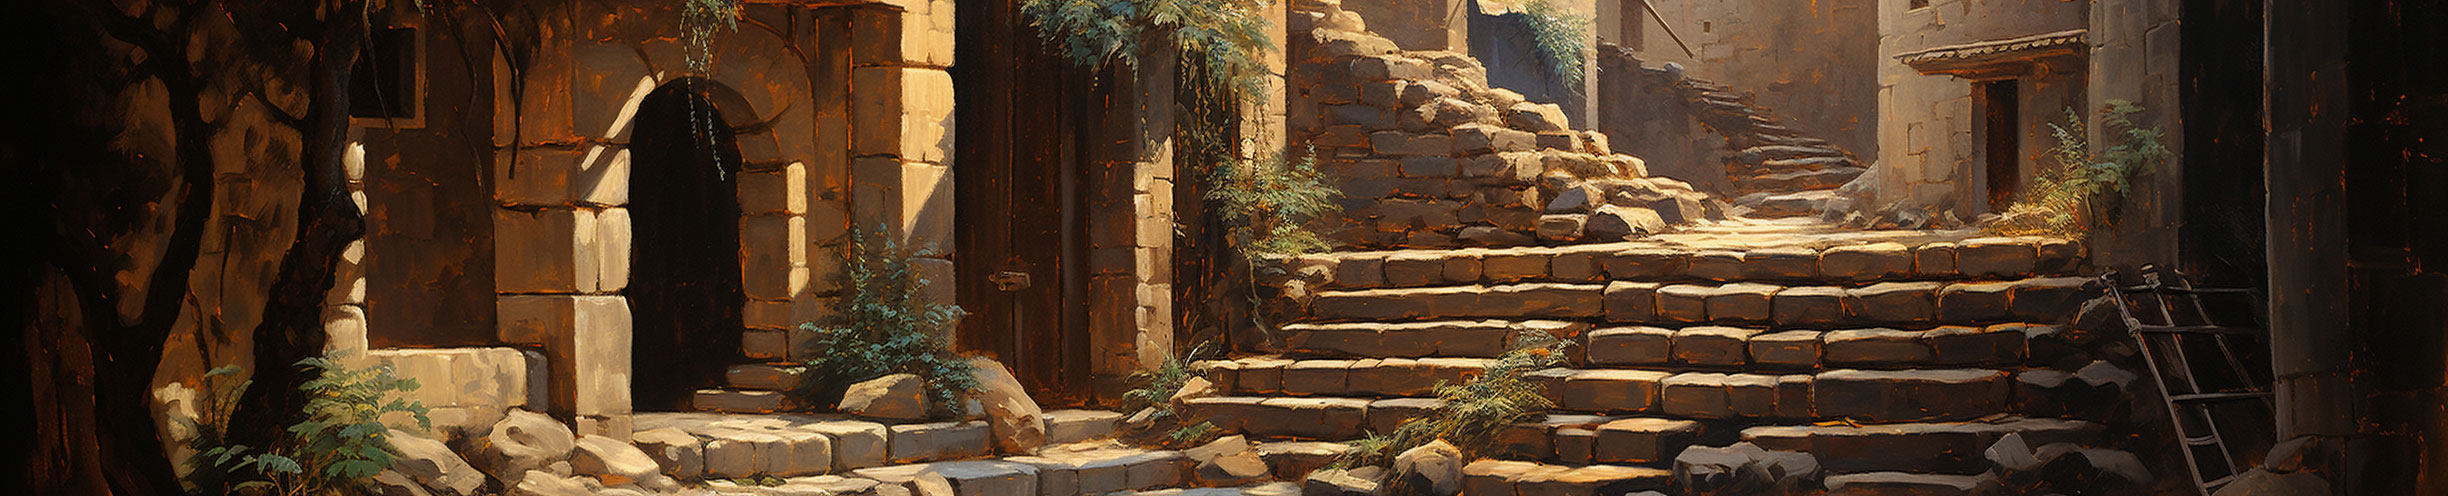 tychodreq_a_finely_detailed_oil_painting_of_a_stone_stairs_lead_ff764b2d-3bb7-451a-8f42-31508fbe5701.jpg